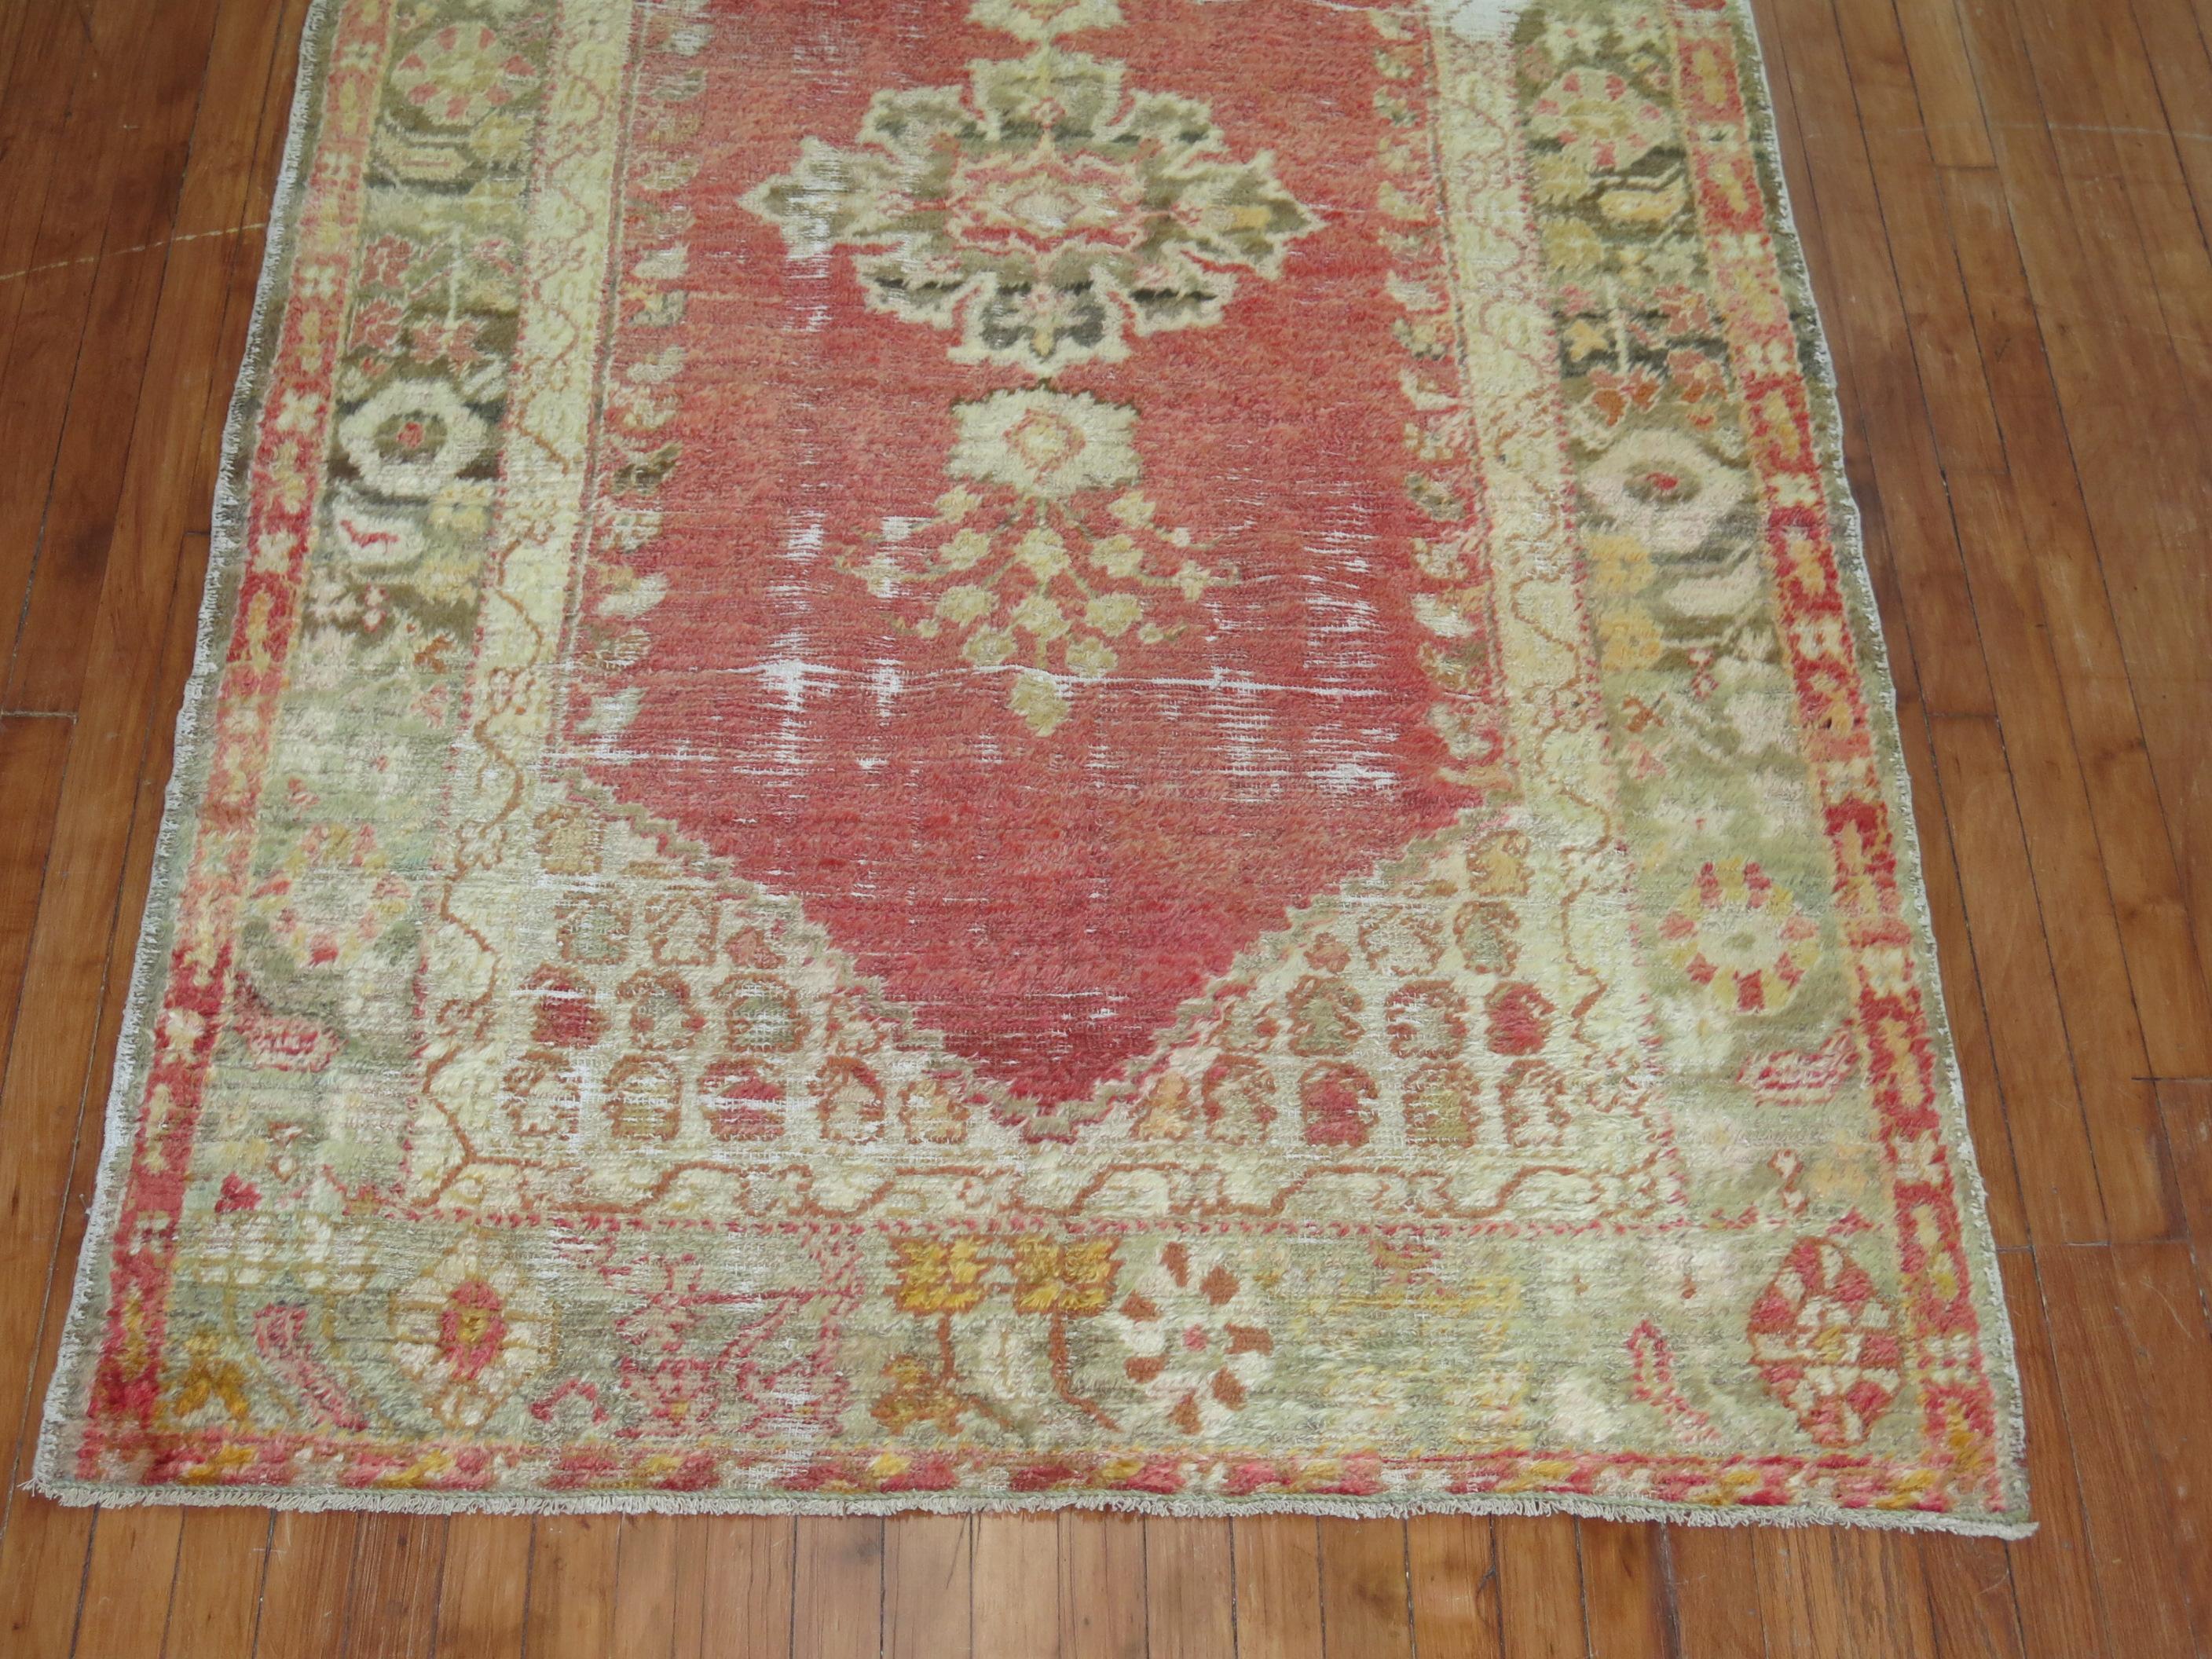 An early 20th century angora wool Oushak rug with a soft watermelon colored ground on an open field and center medallion with the perfect amount of natural wear.